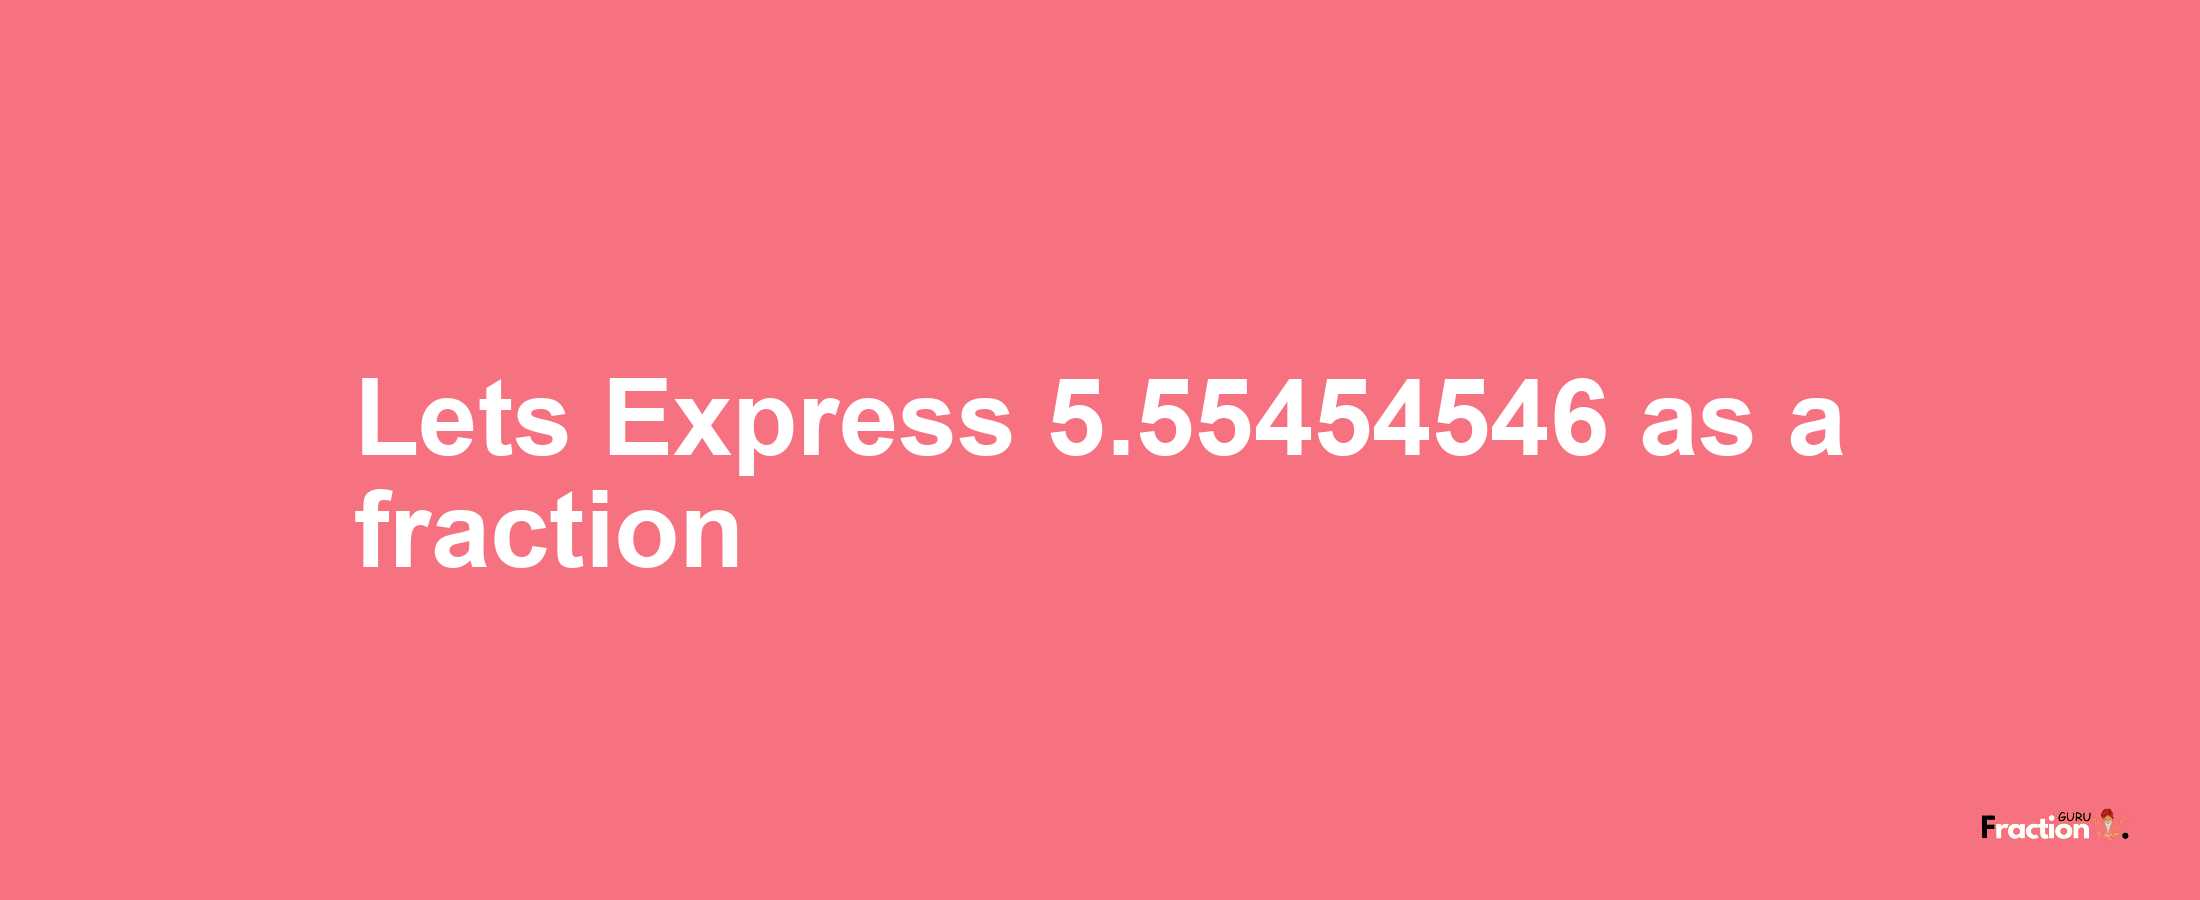 Lets Express 5.55454546 as afraction